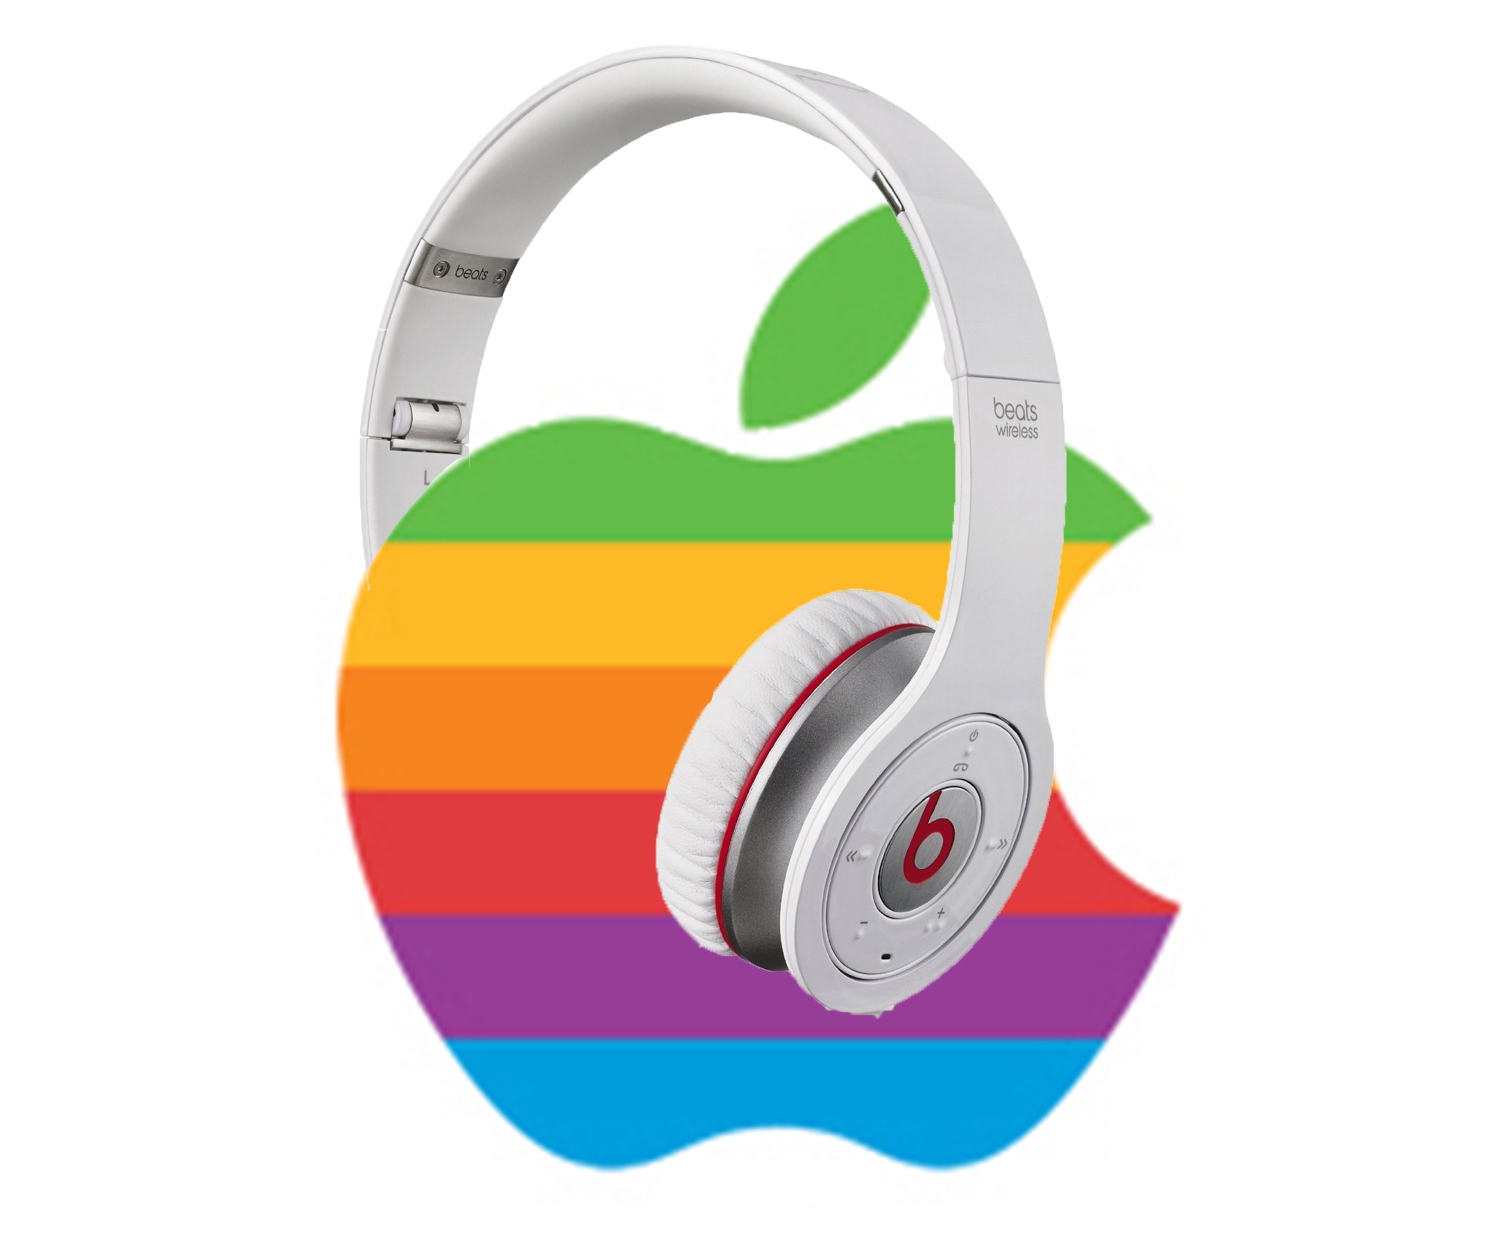 Is Apple about to buy Beats in $3.2 billion deal? - Mario Armstrong